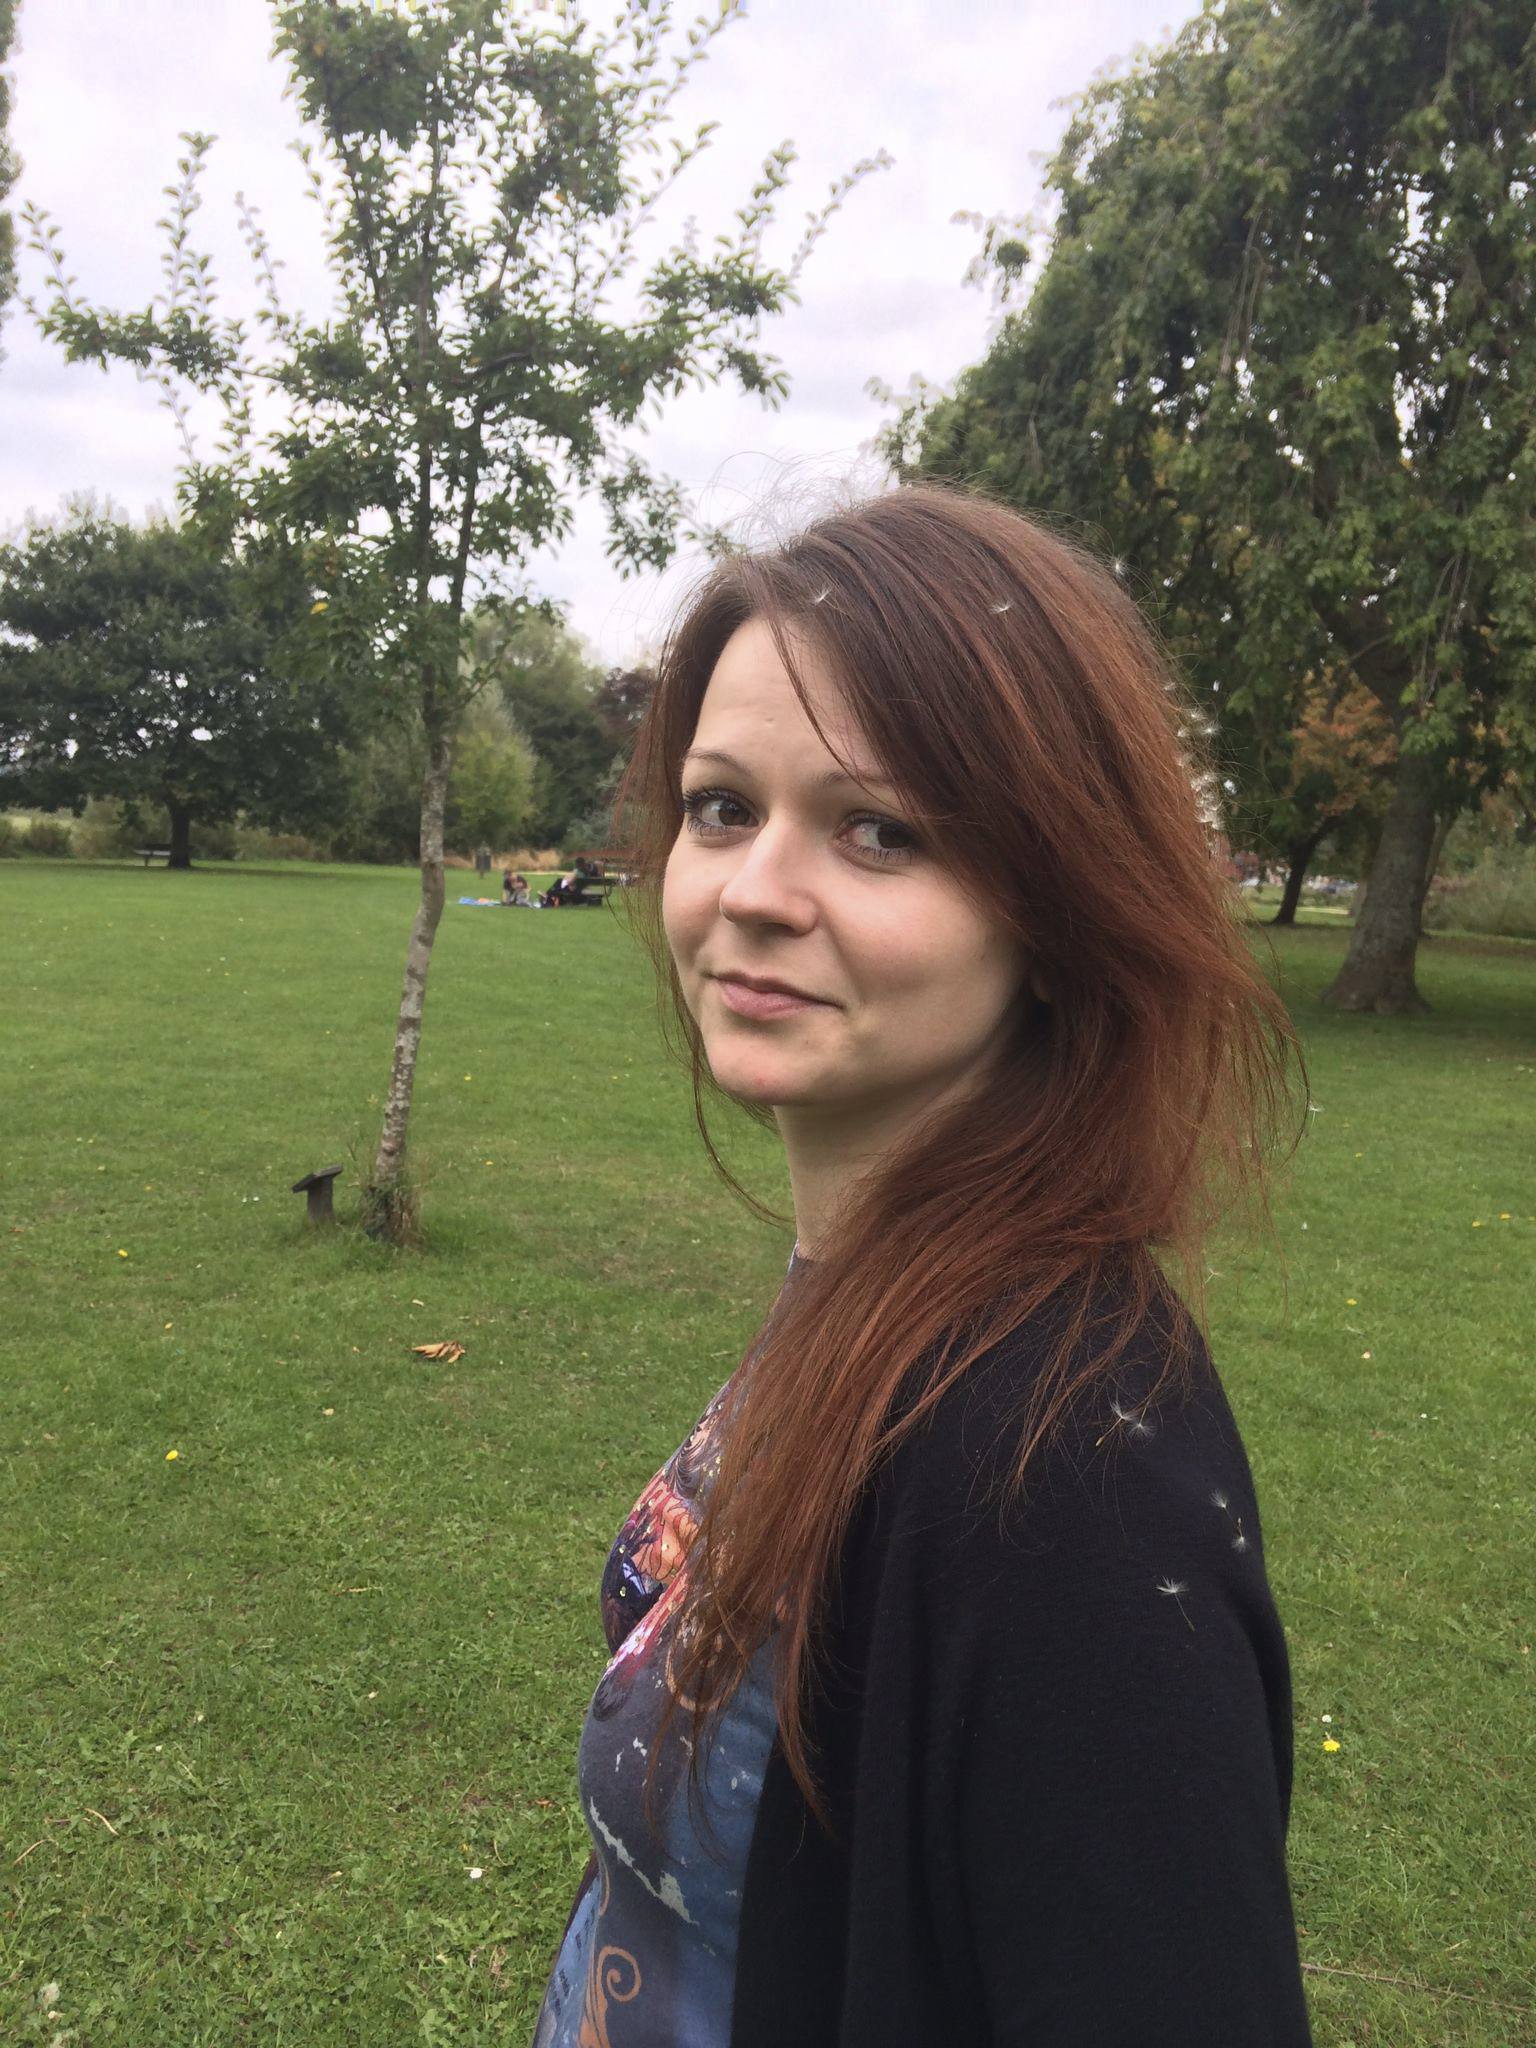 PHOTO:This undated image taken from the Facebook page of Yulia Skripal on March 8, 2018 allegedly shows Yulia Skripal, the daughter of former Russian spy Sergei Skripal, in an unknown location.